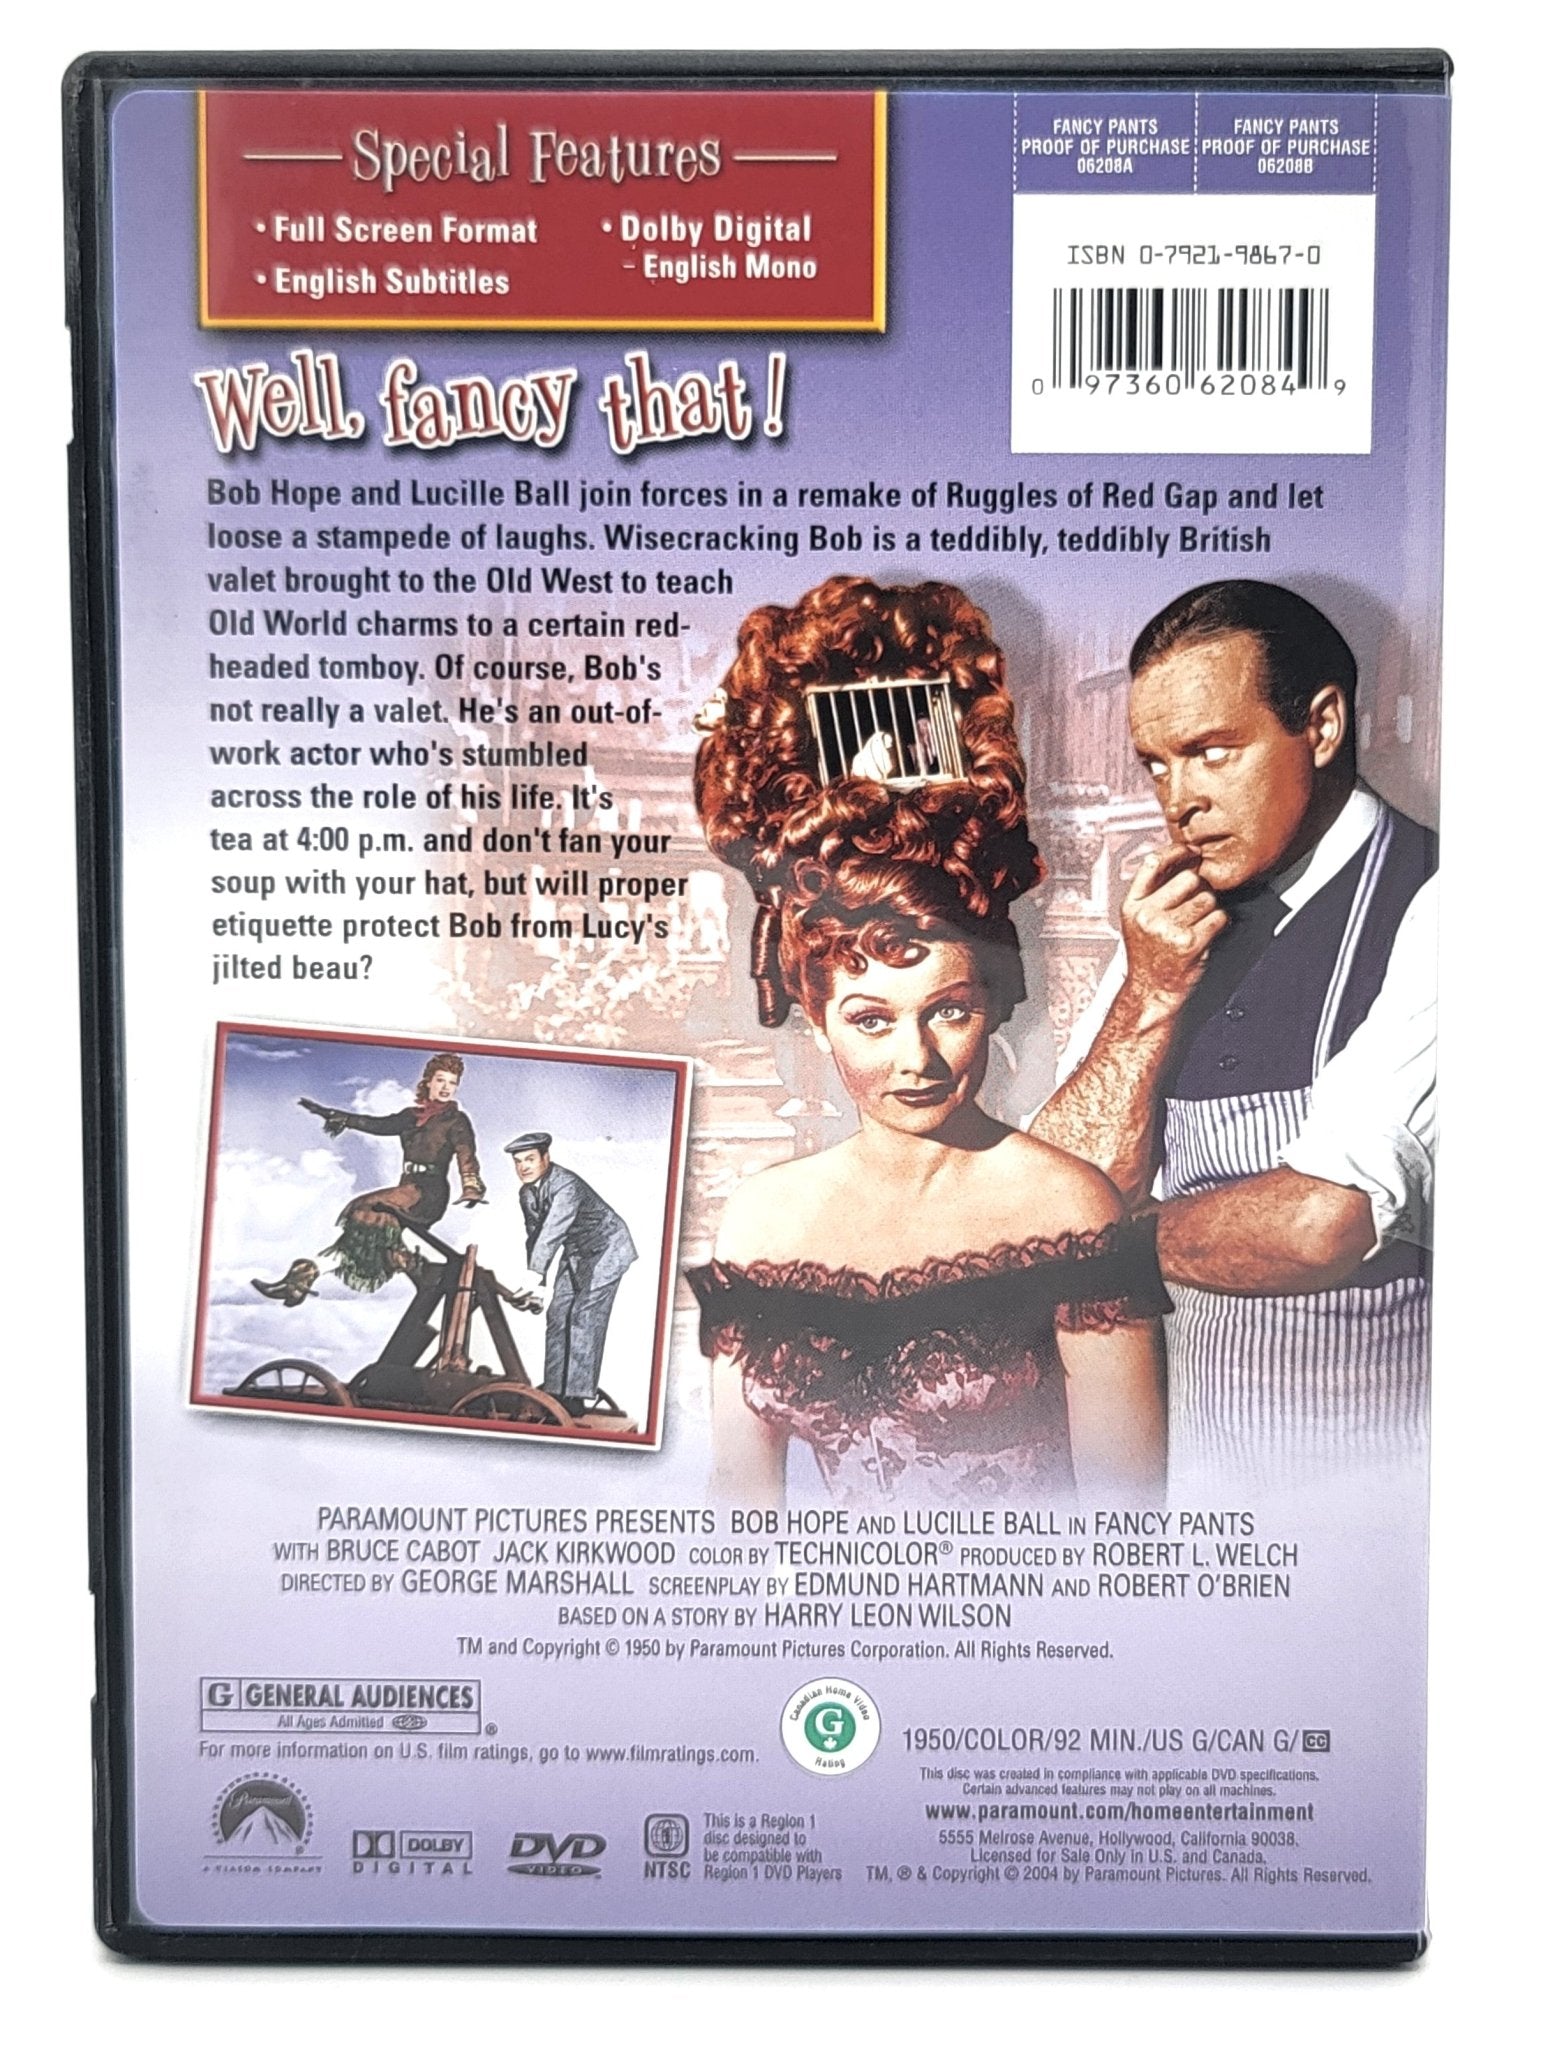 Parmount Pictures - Fancy Pants | DVD | Paramount DVD Collection | Full Screen - DVD - Steady Bunny Shop